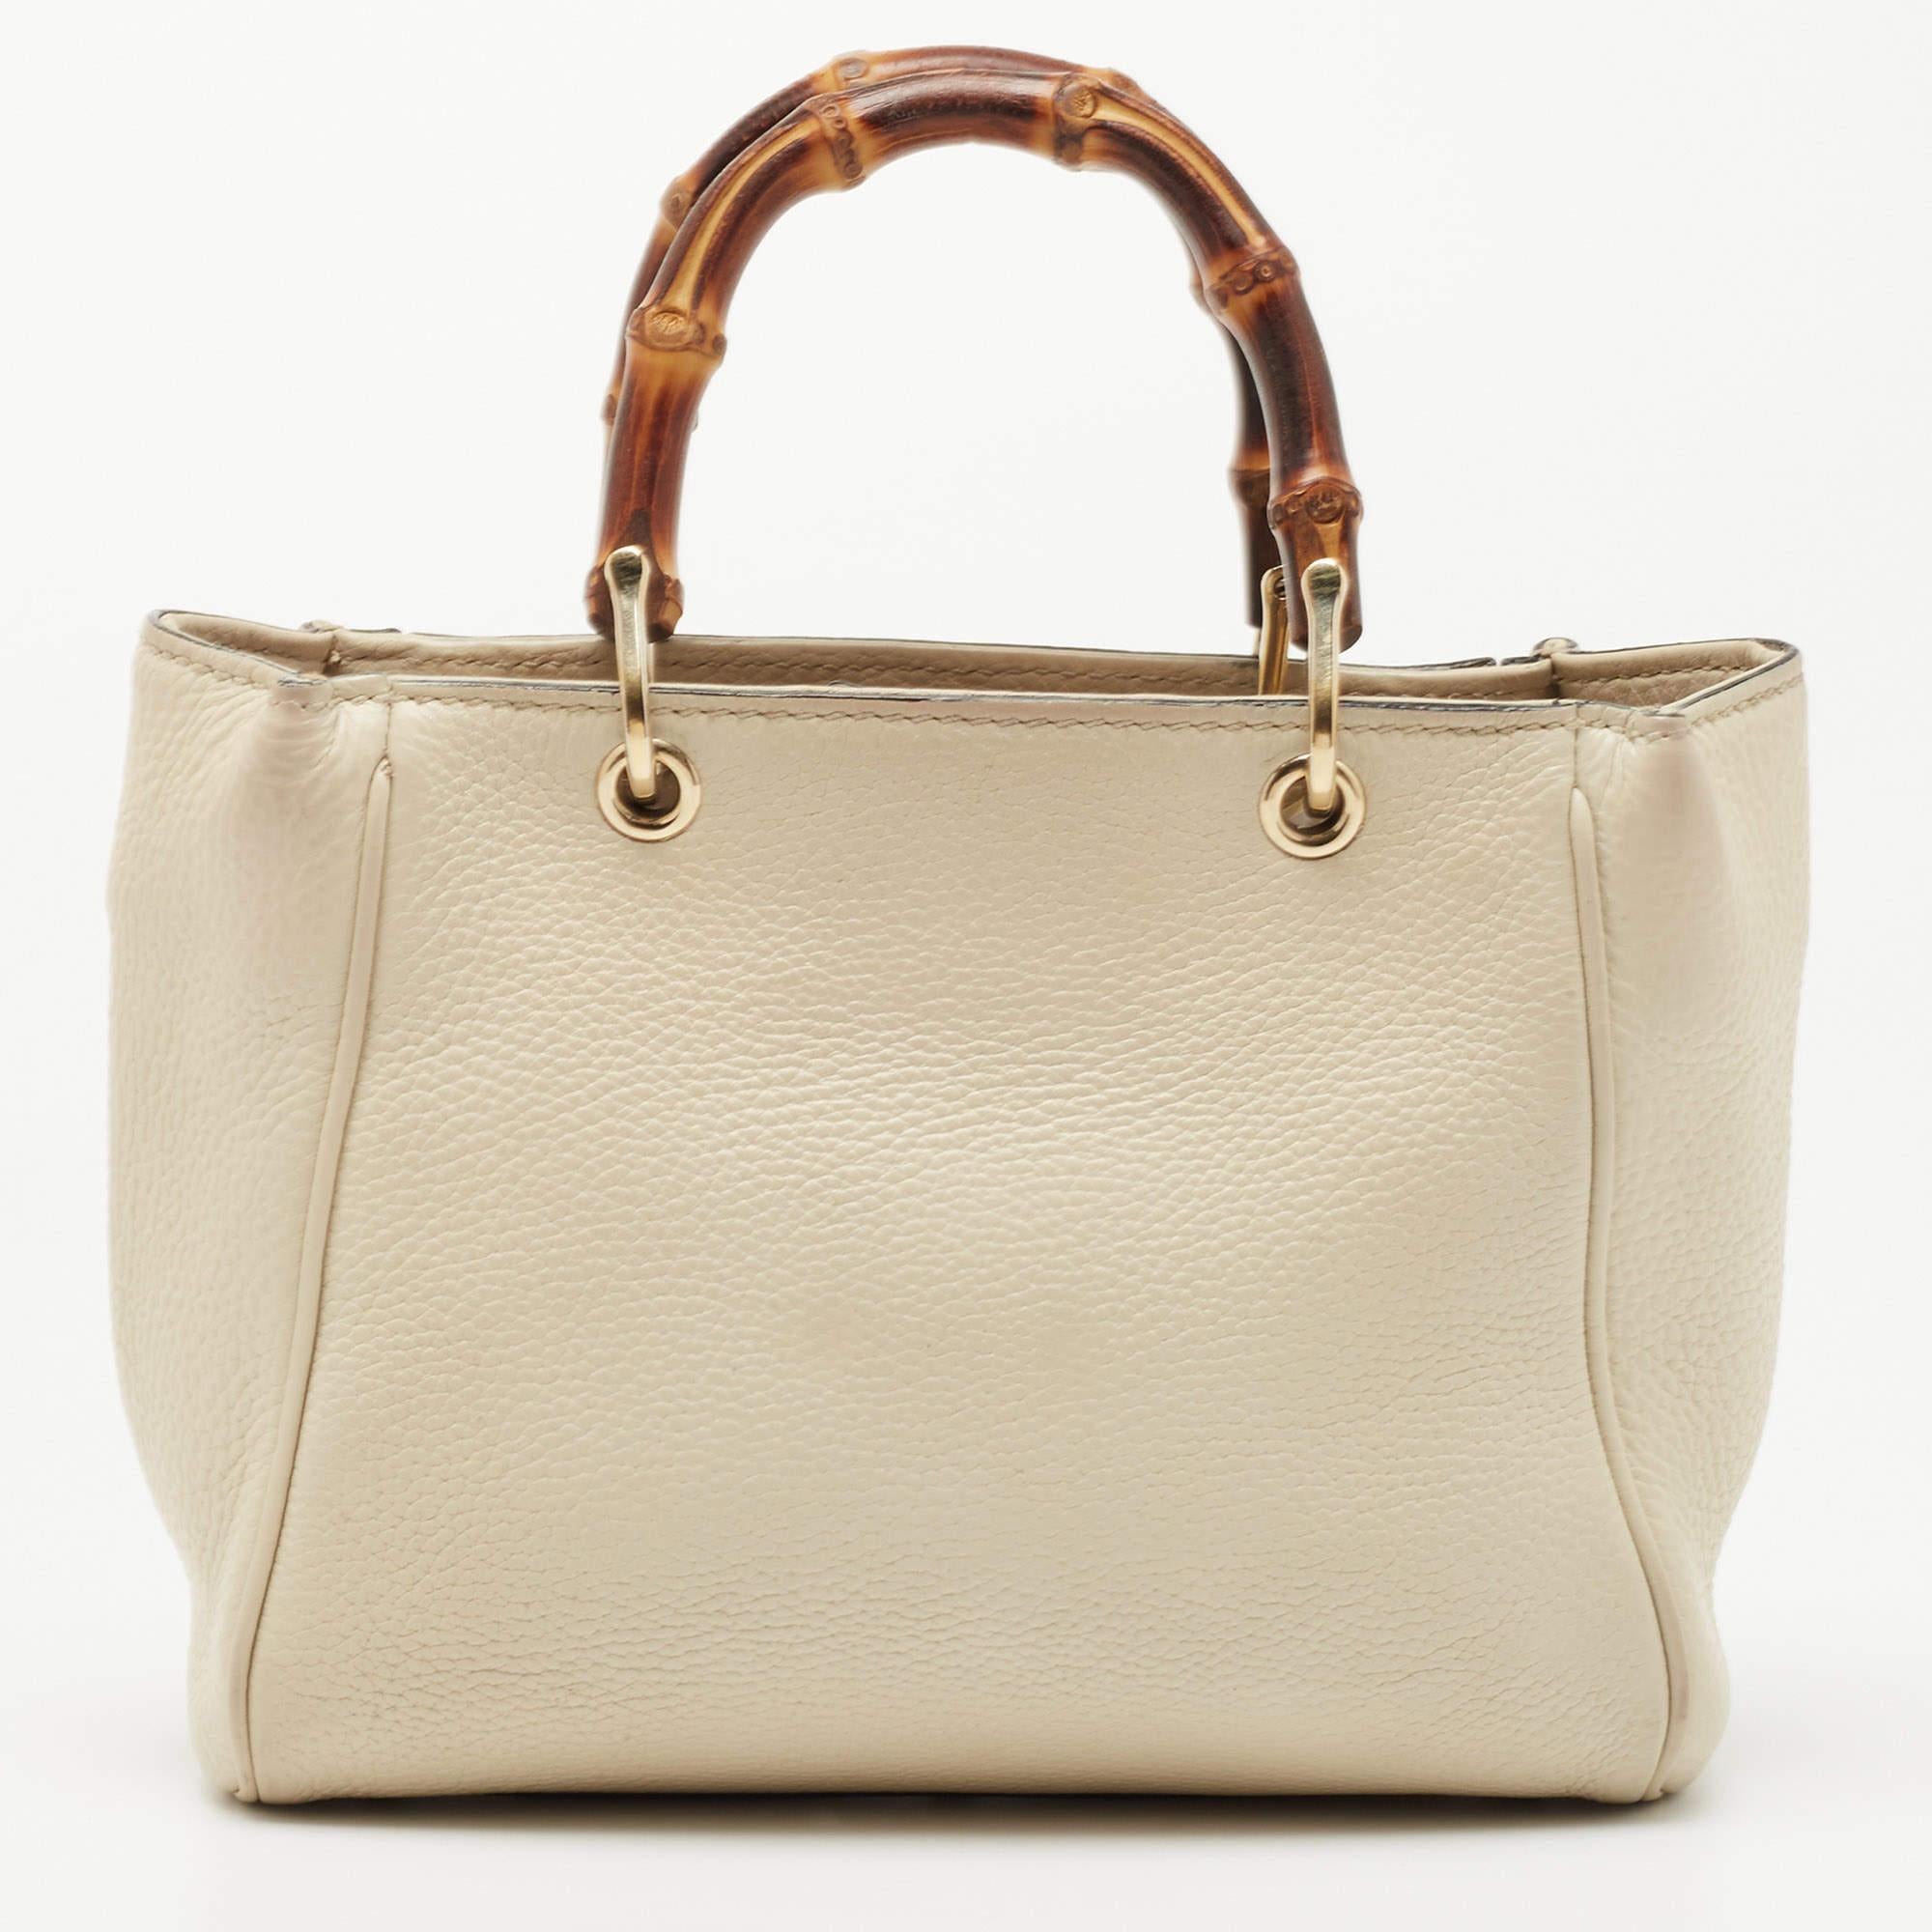 Handbags as fabulous as this one are hard to come by. So, own this gorgeous tote from Gucci today and light up your closet! Crafted from off-white leather, this tote has a spacious interior and is wonderfully held by two Bamboo handles, making the